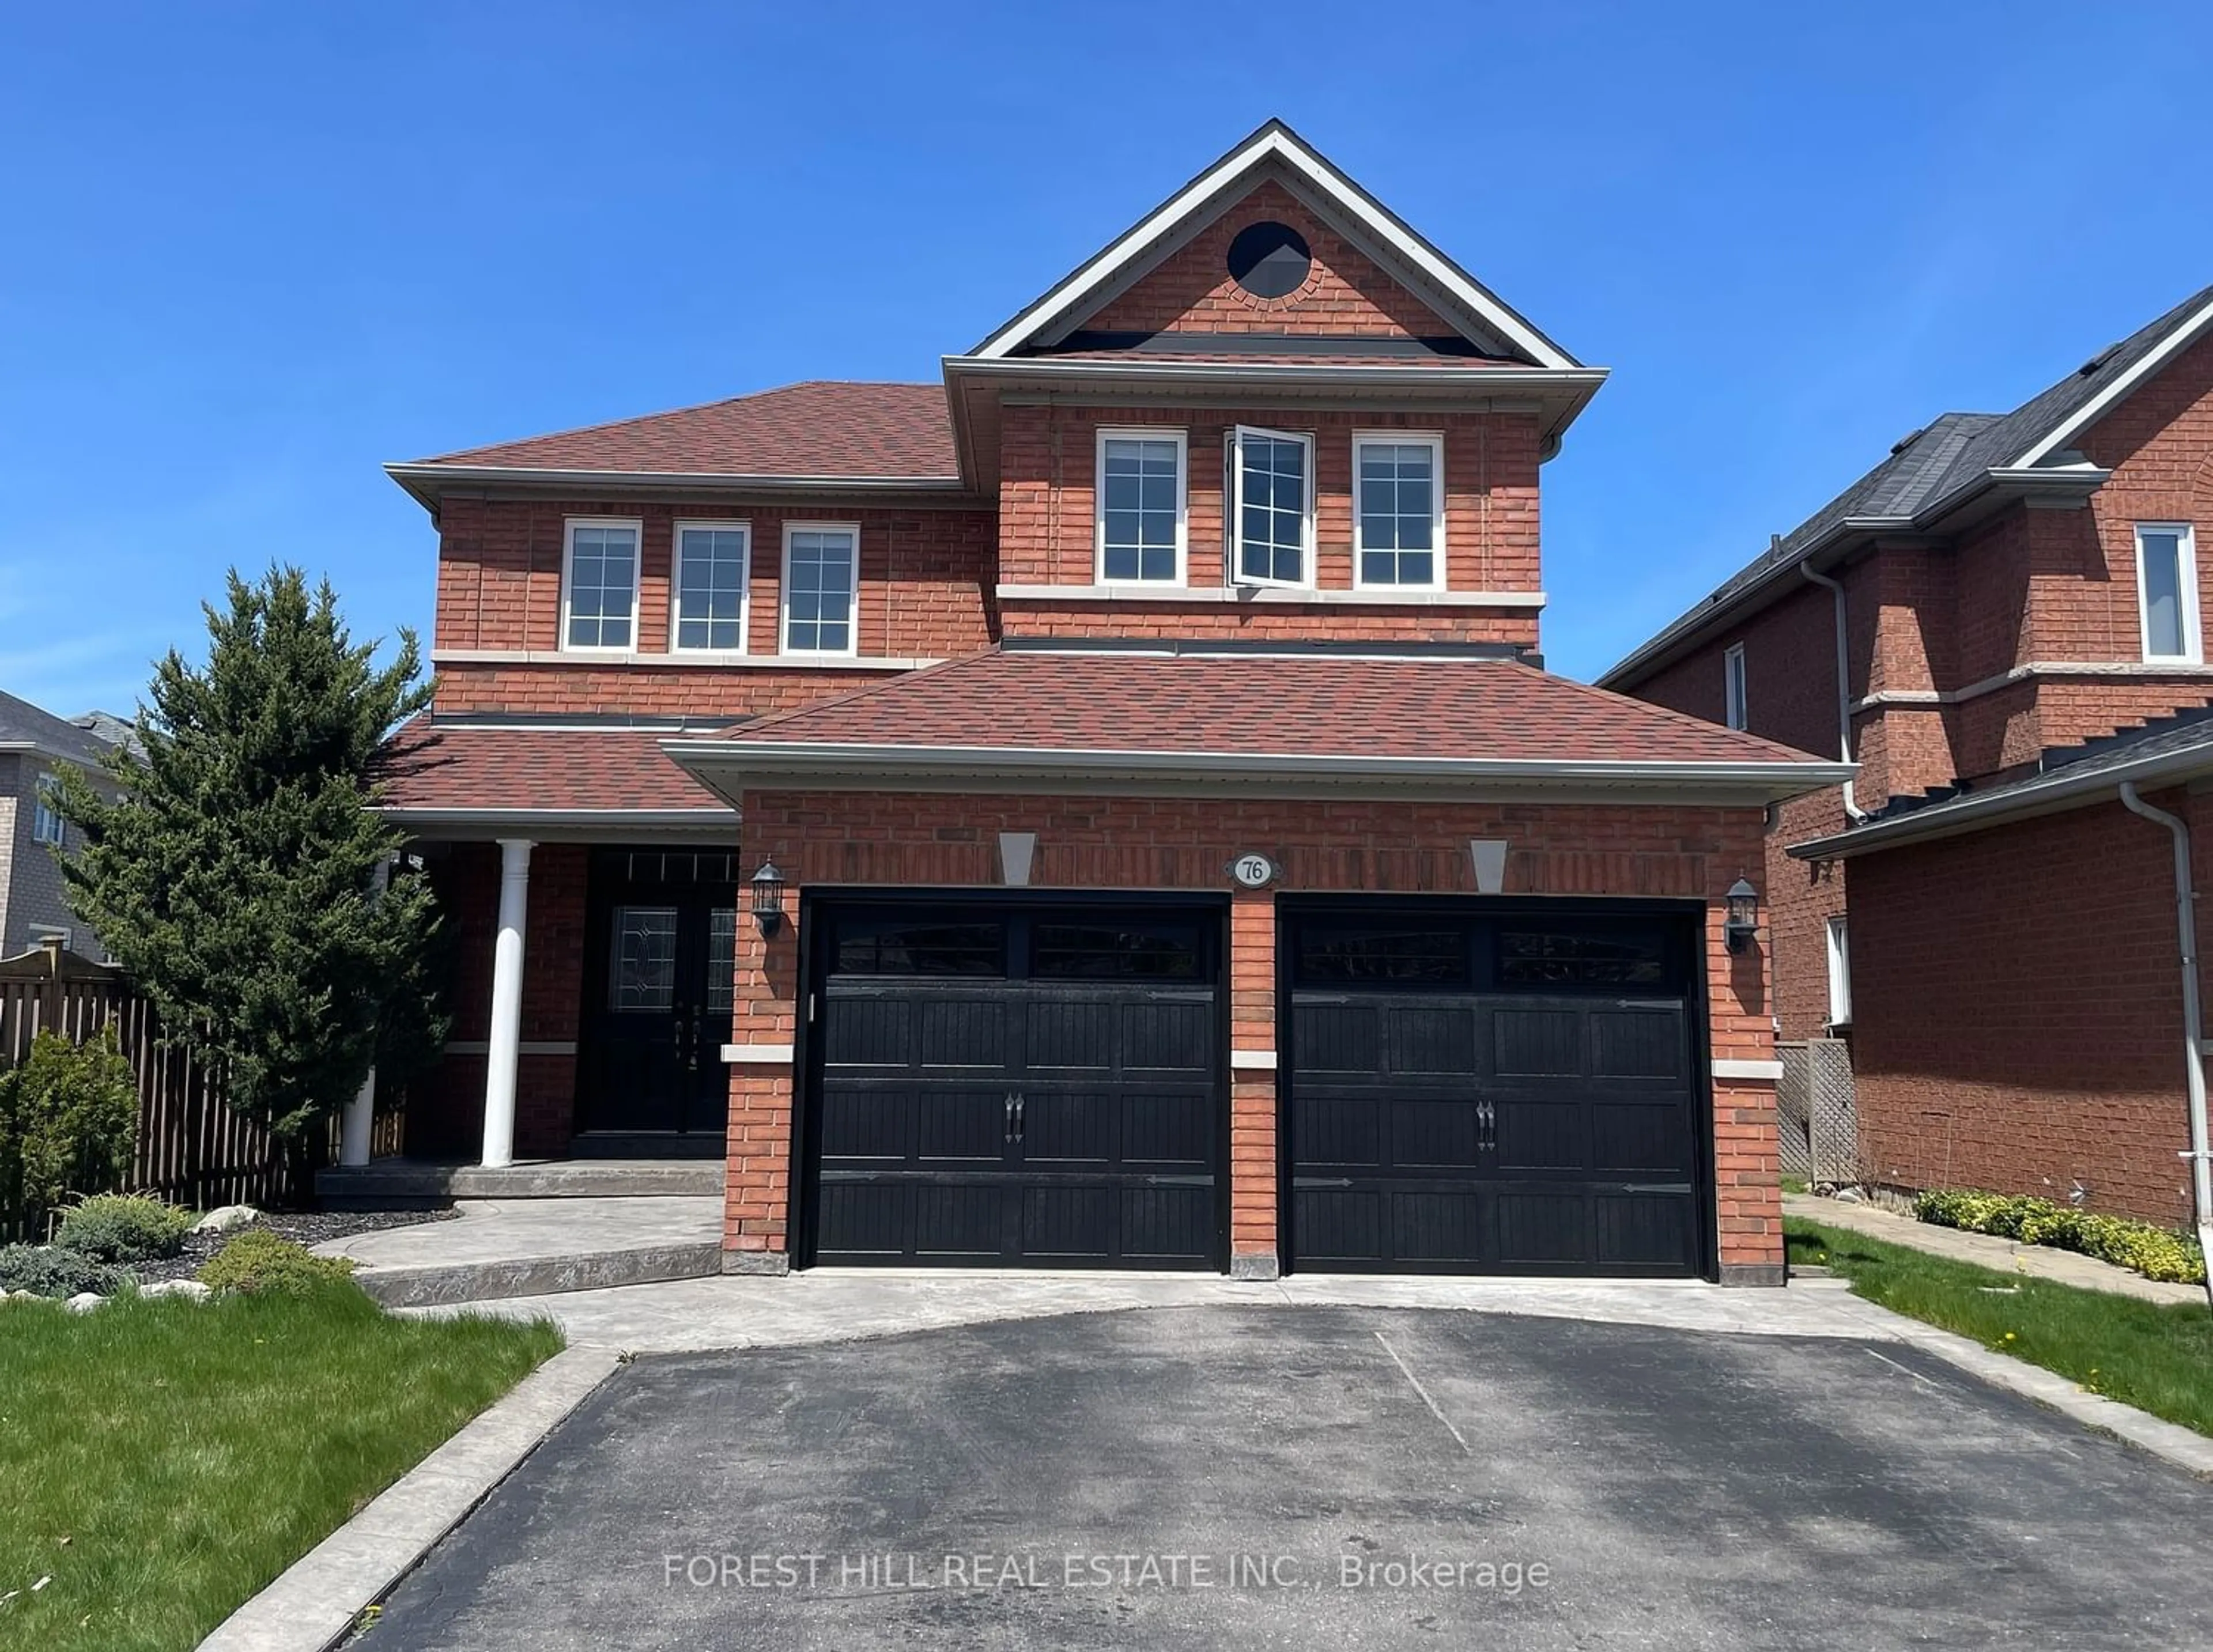 Home with brick exterior material for 76 Deerwood Cres, Richmond Hill Ontario L4E 4B4